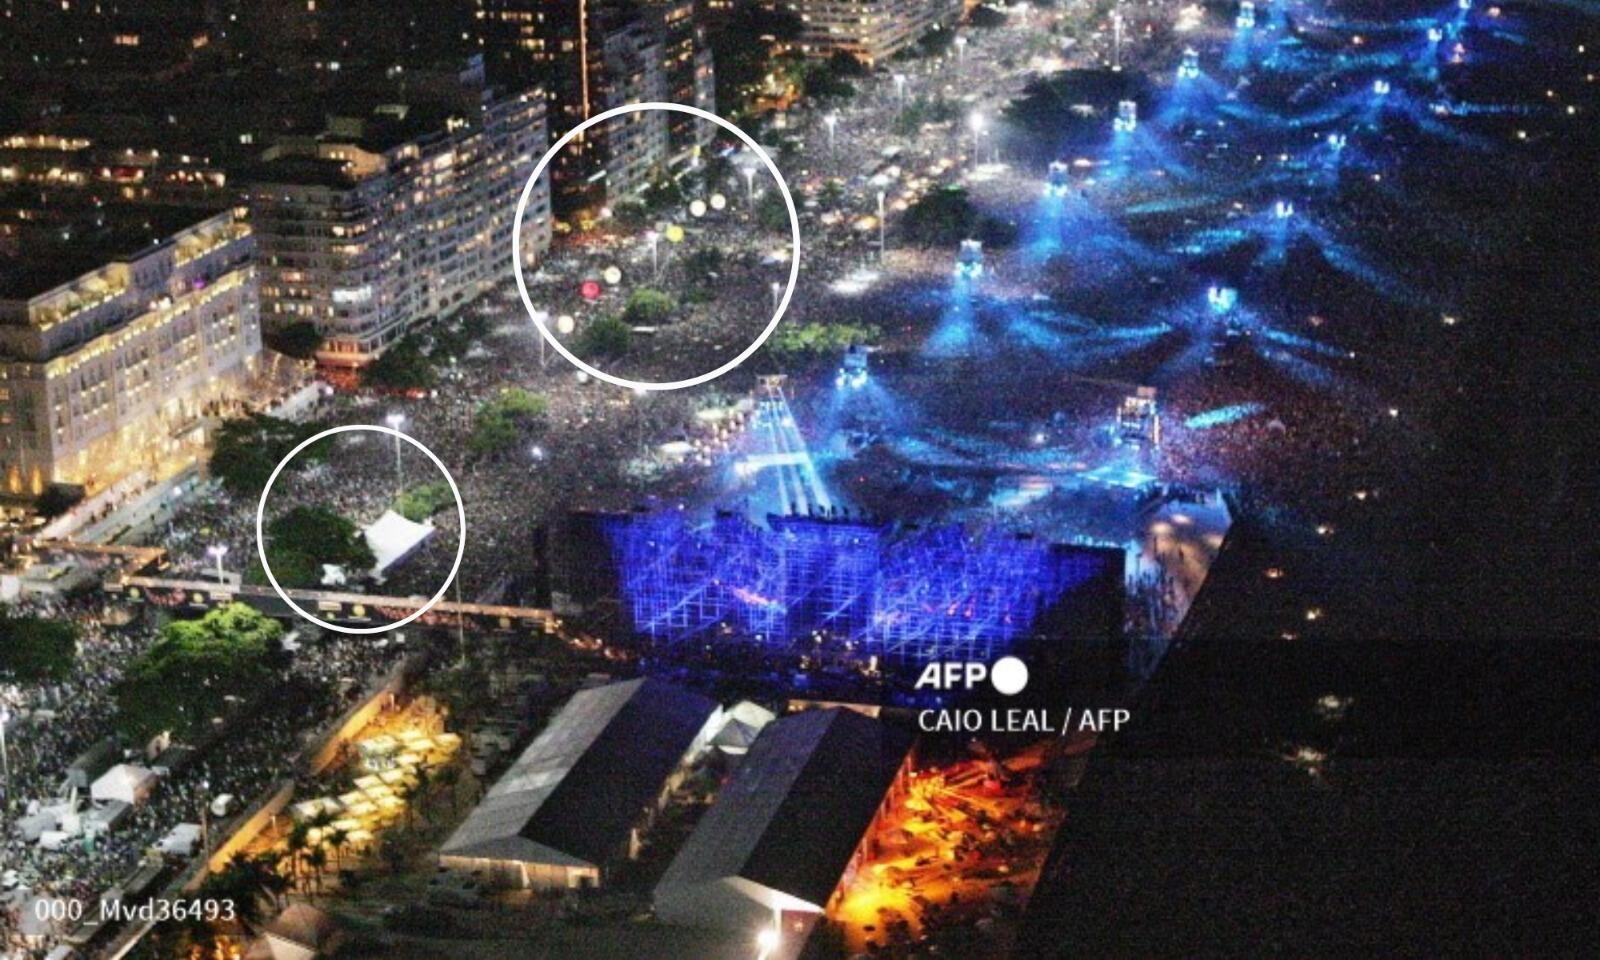 In this image taken during the Rolling Stones concert, we find the remarkable points mentioned above.  Balloons, and white structures.